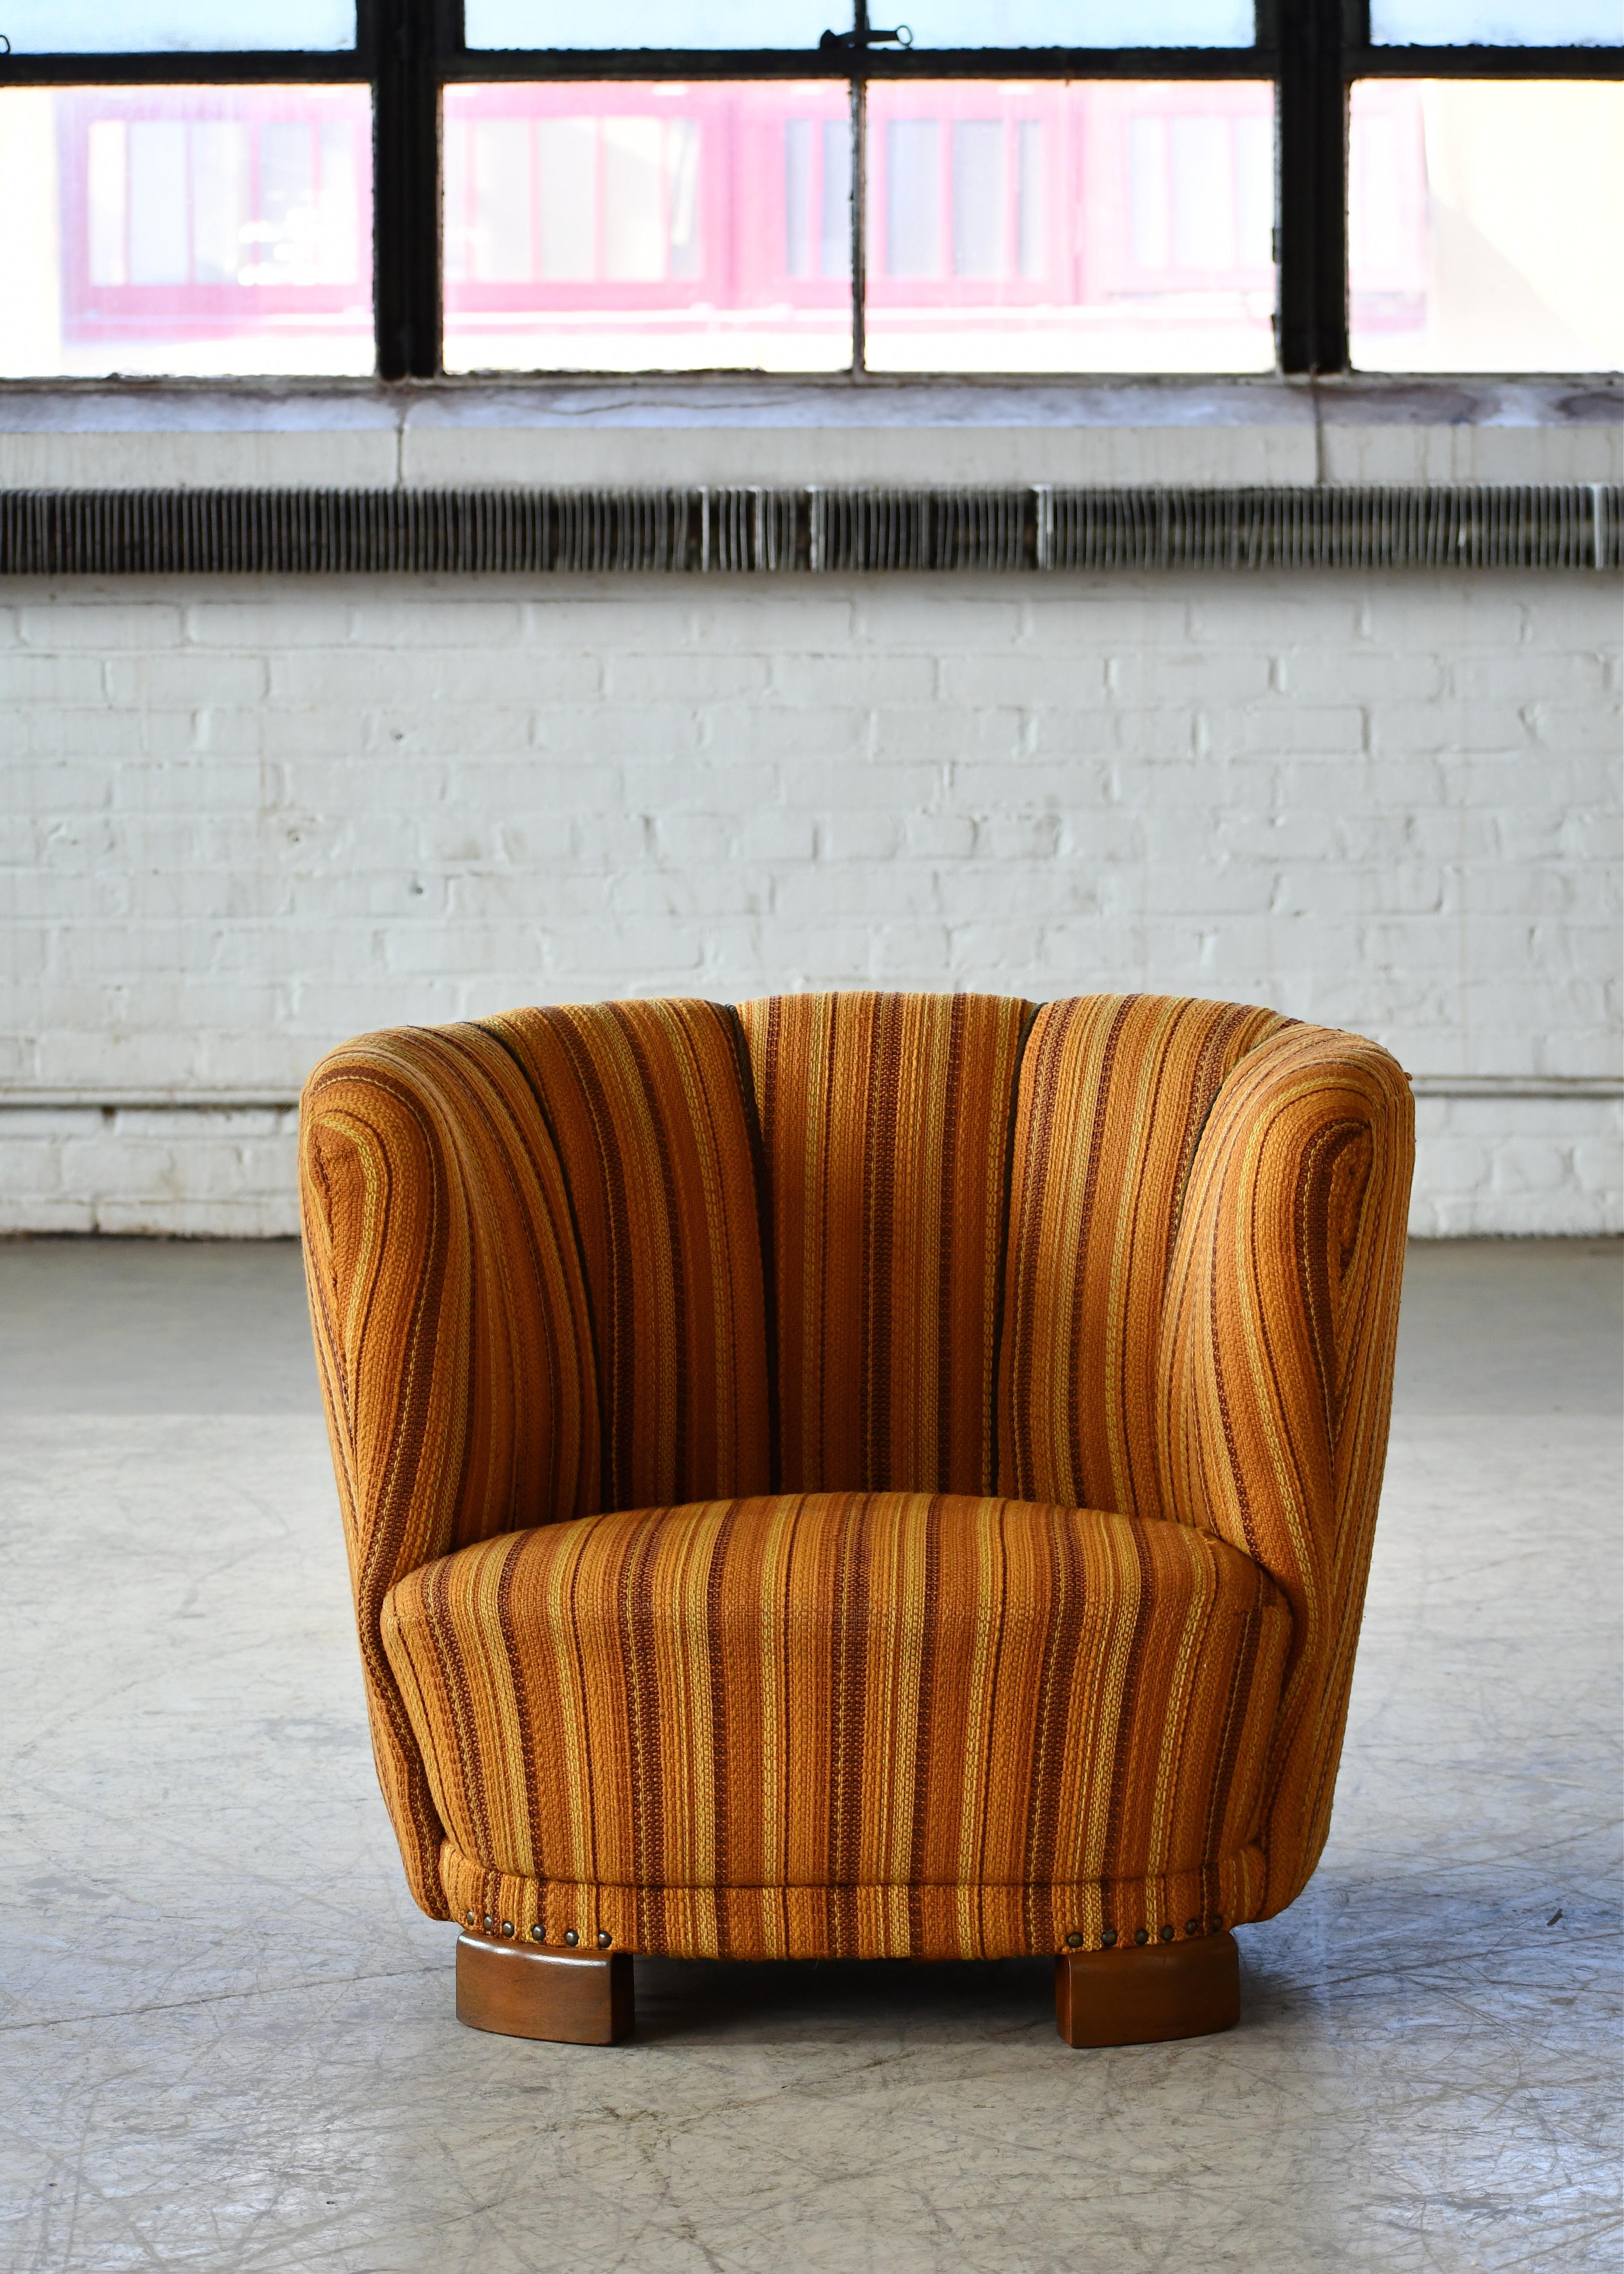 Comfortable, exuberant, and superbly made, this chair perfectly captures the essence of 1940s Danish design coming out of the late Art Deco era and into the early midcentury. The curved backrests and low slung proportions clearly hint at inspiration